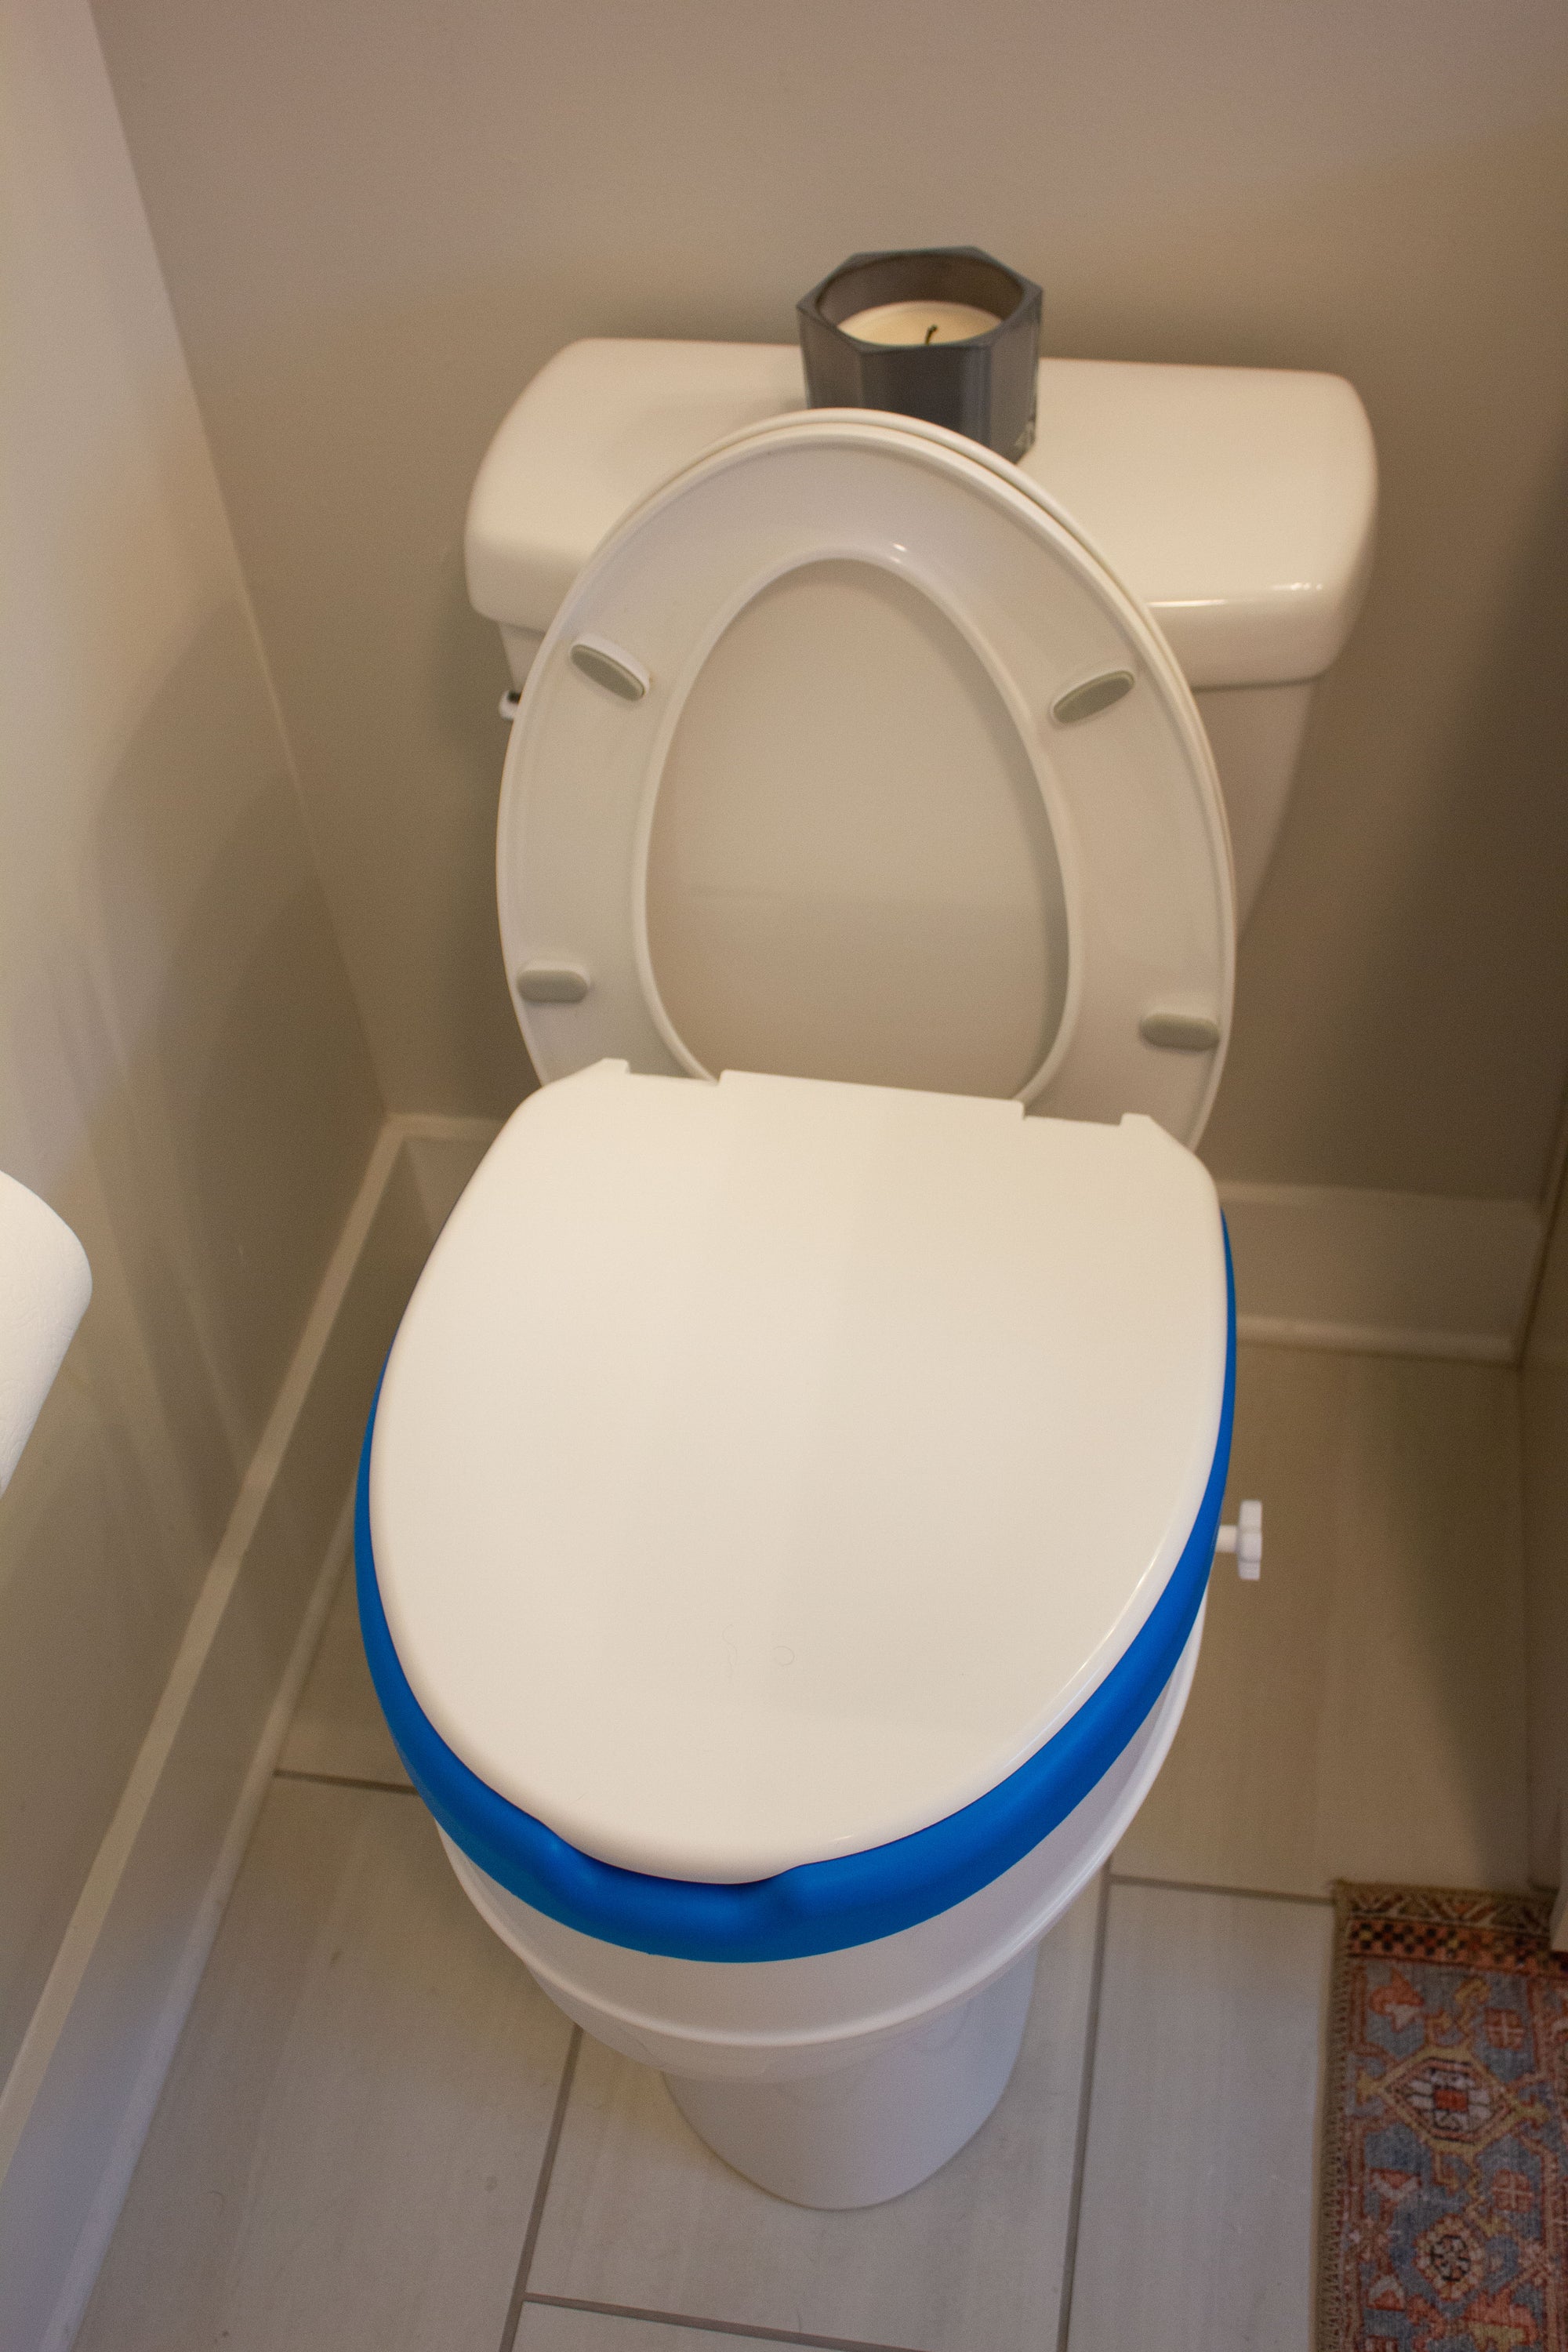 Padded Toilet Seat Riser  Bathroom Assistive Devices